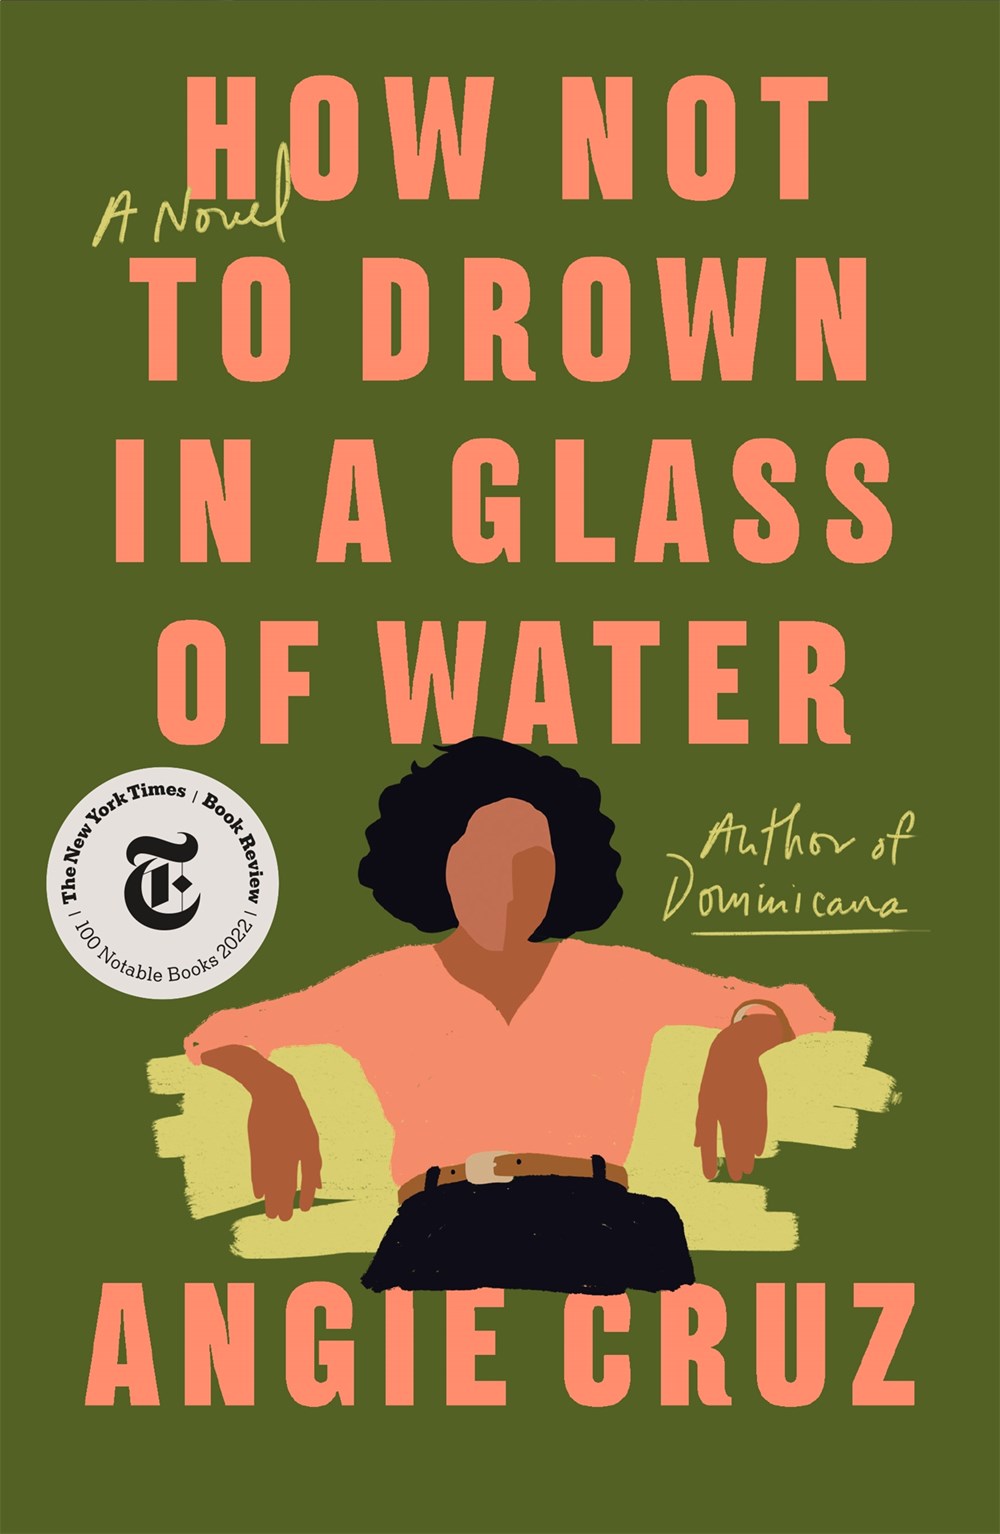 How Not To Drown in a Glass of Water by Angie Cruz (Paperback)